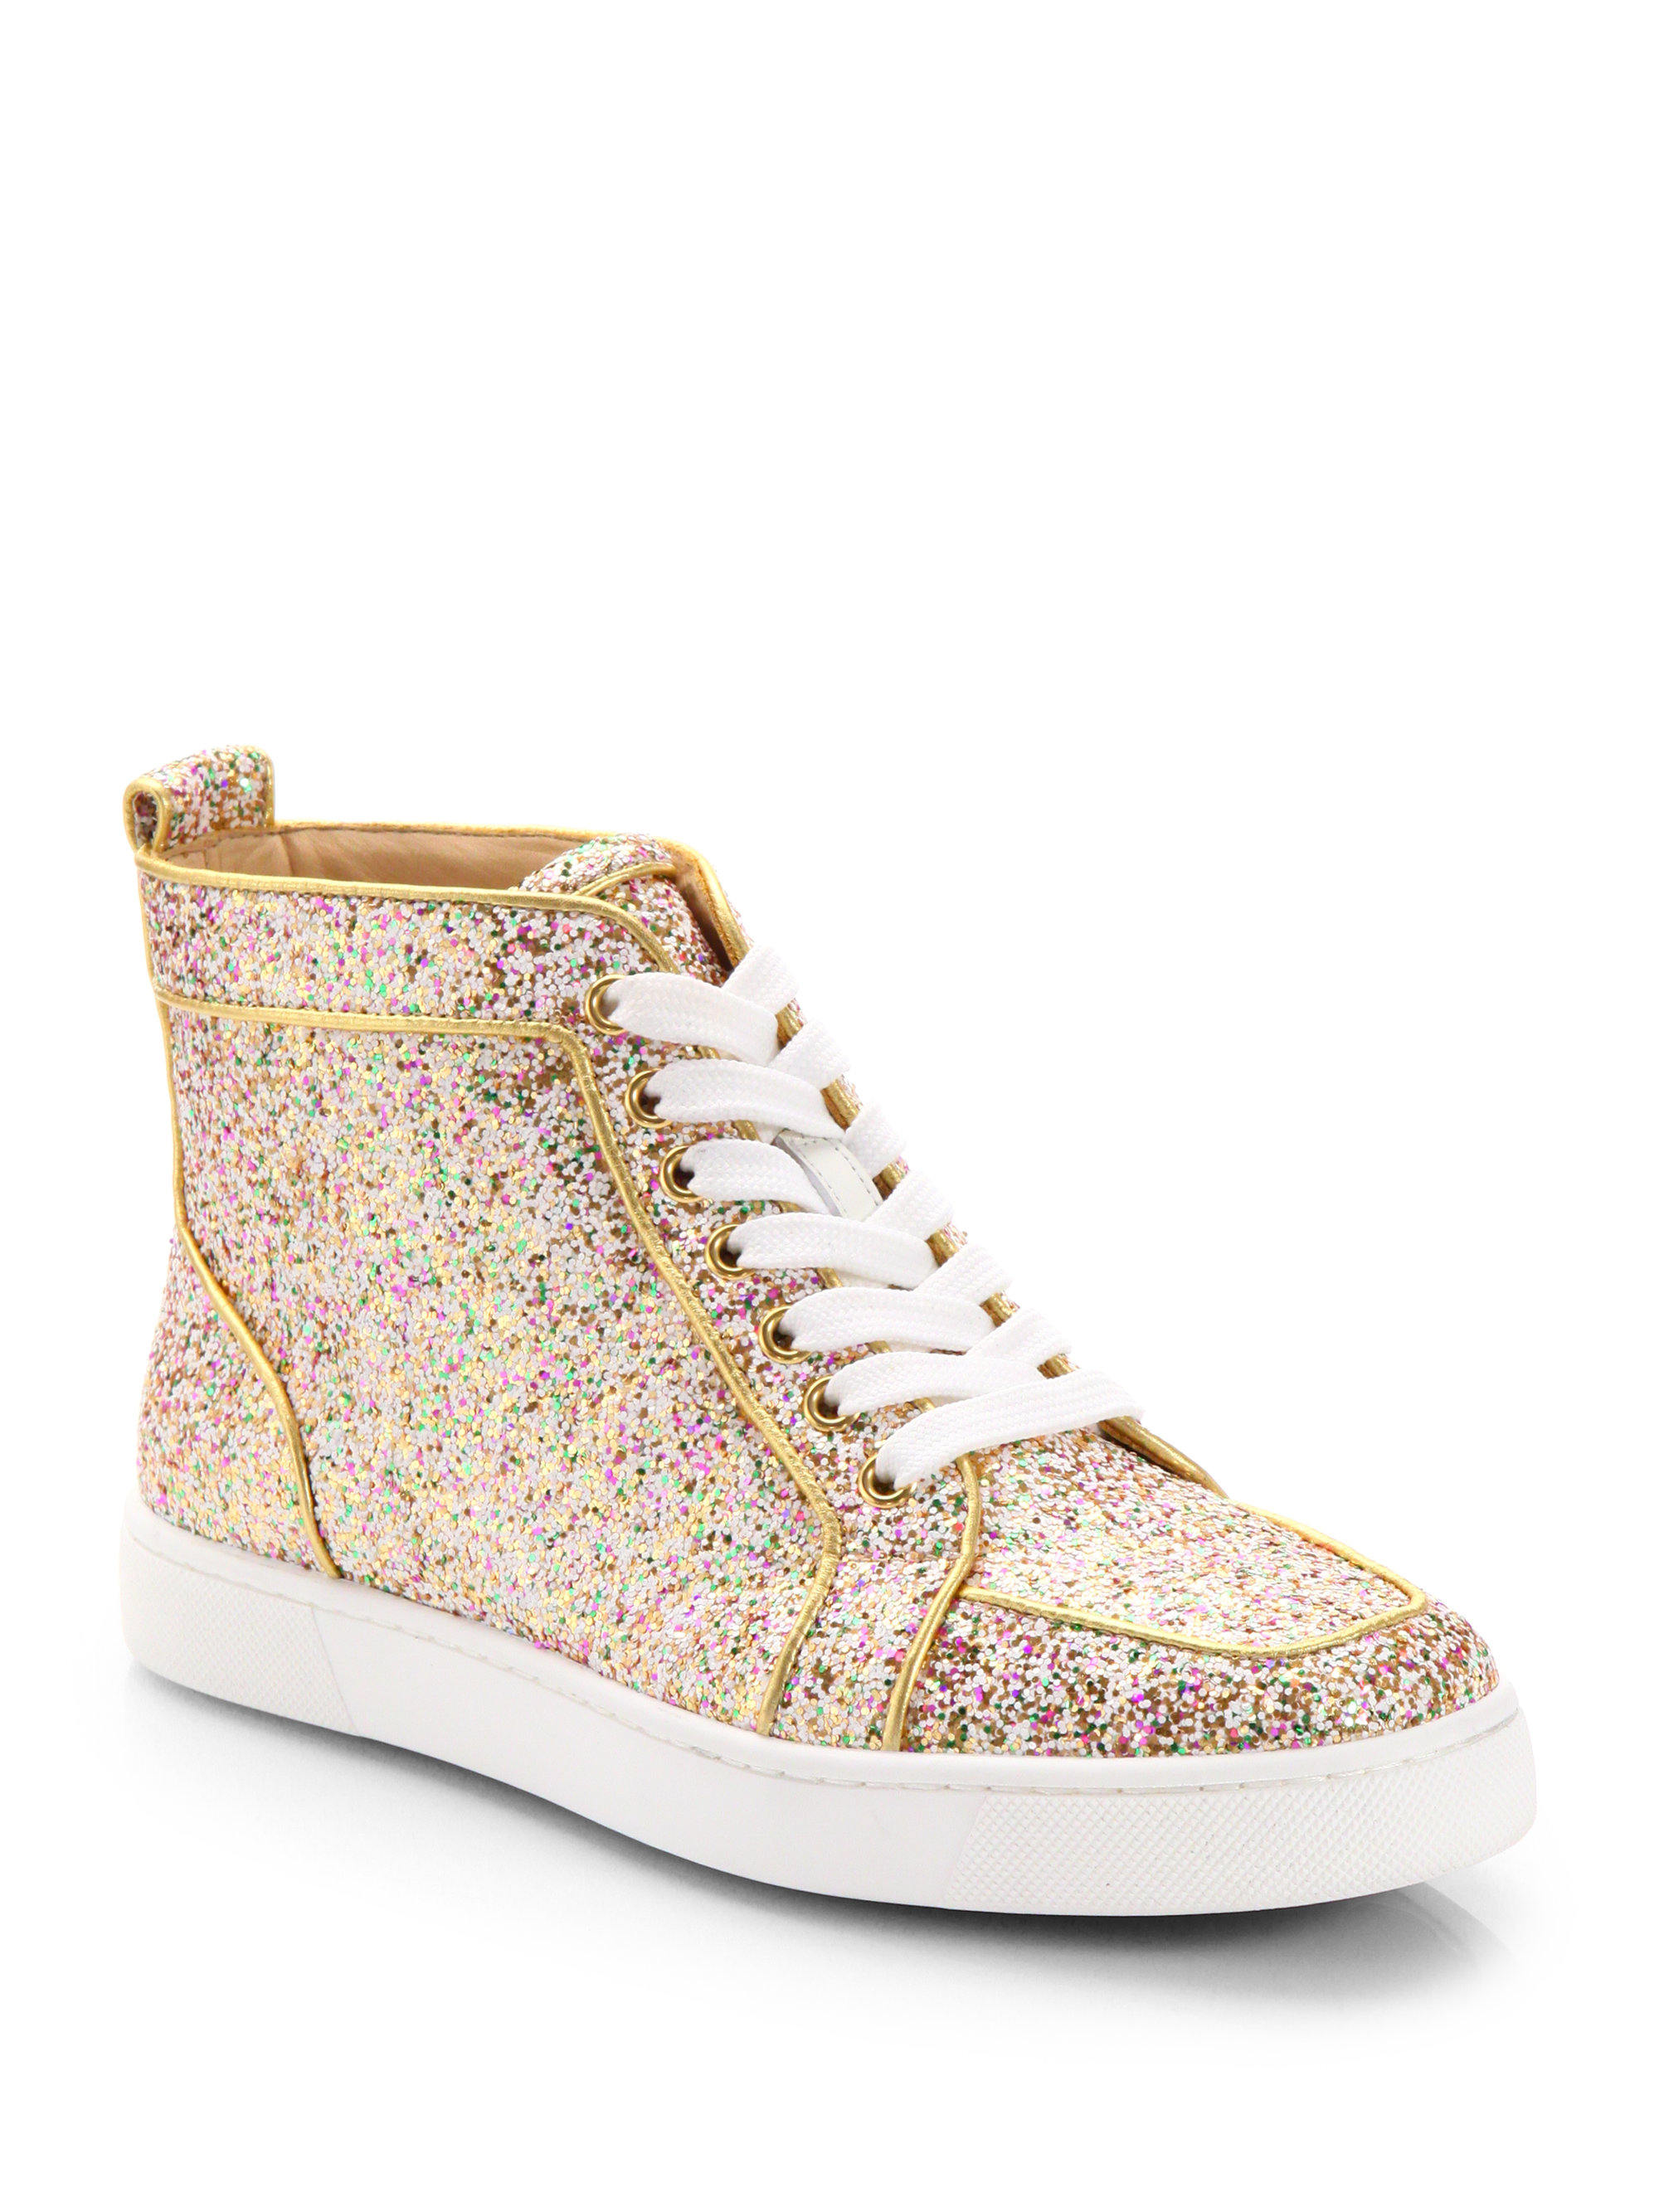 christian louboutin grey wedge sneakers - Catholic Commission for ...  